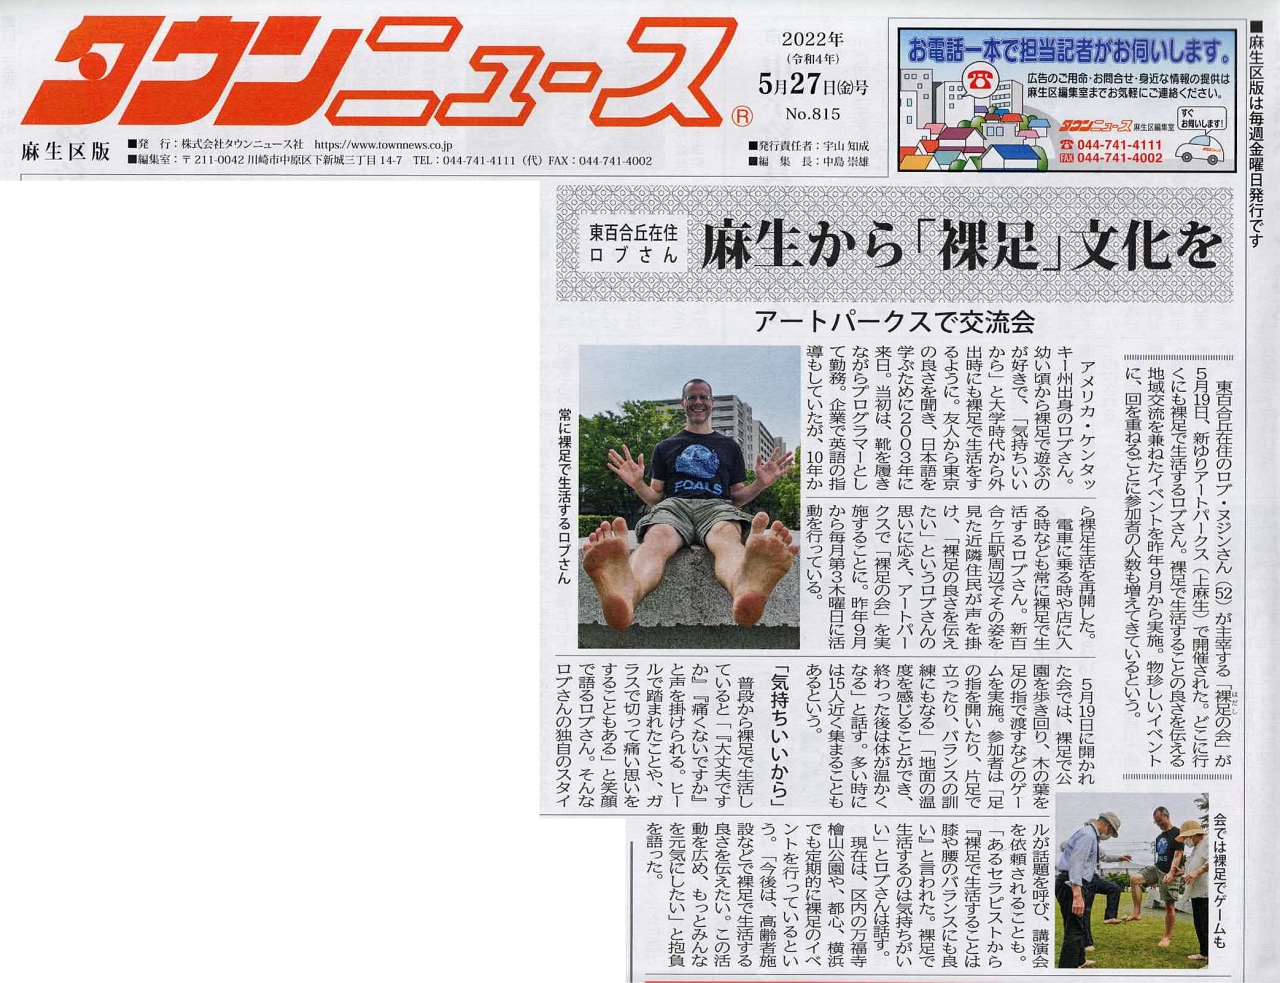 May 2022 Town News article about Barefoot Rob Nugen's walking
event in ShinYuri Art Park